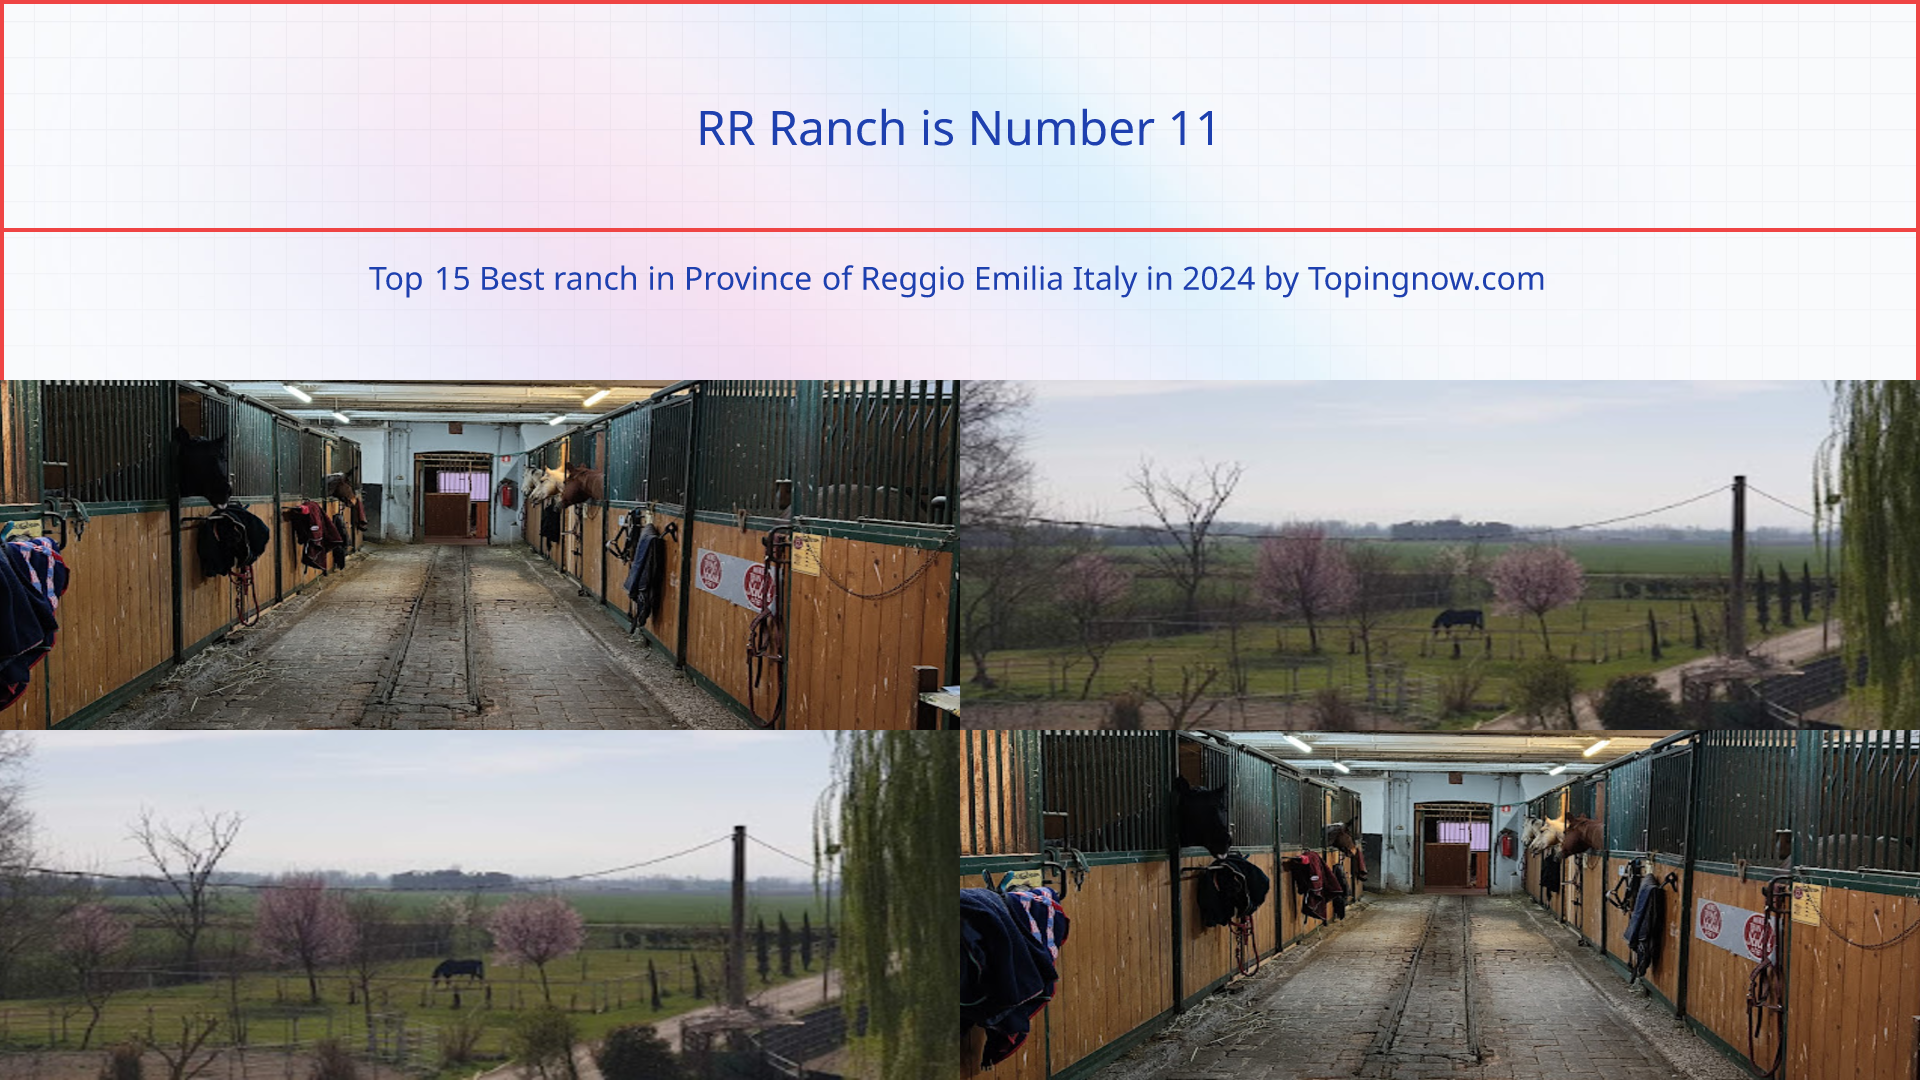 RR Ranch: Top 15 Best ranch in Province of Reggio Emilia Italy in 2024